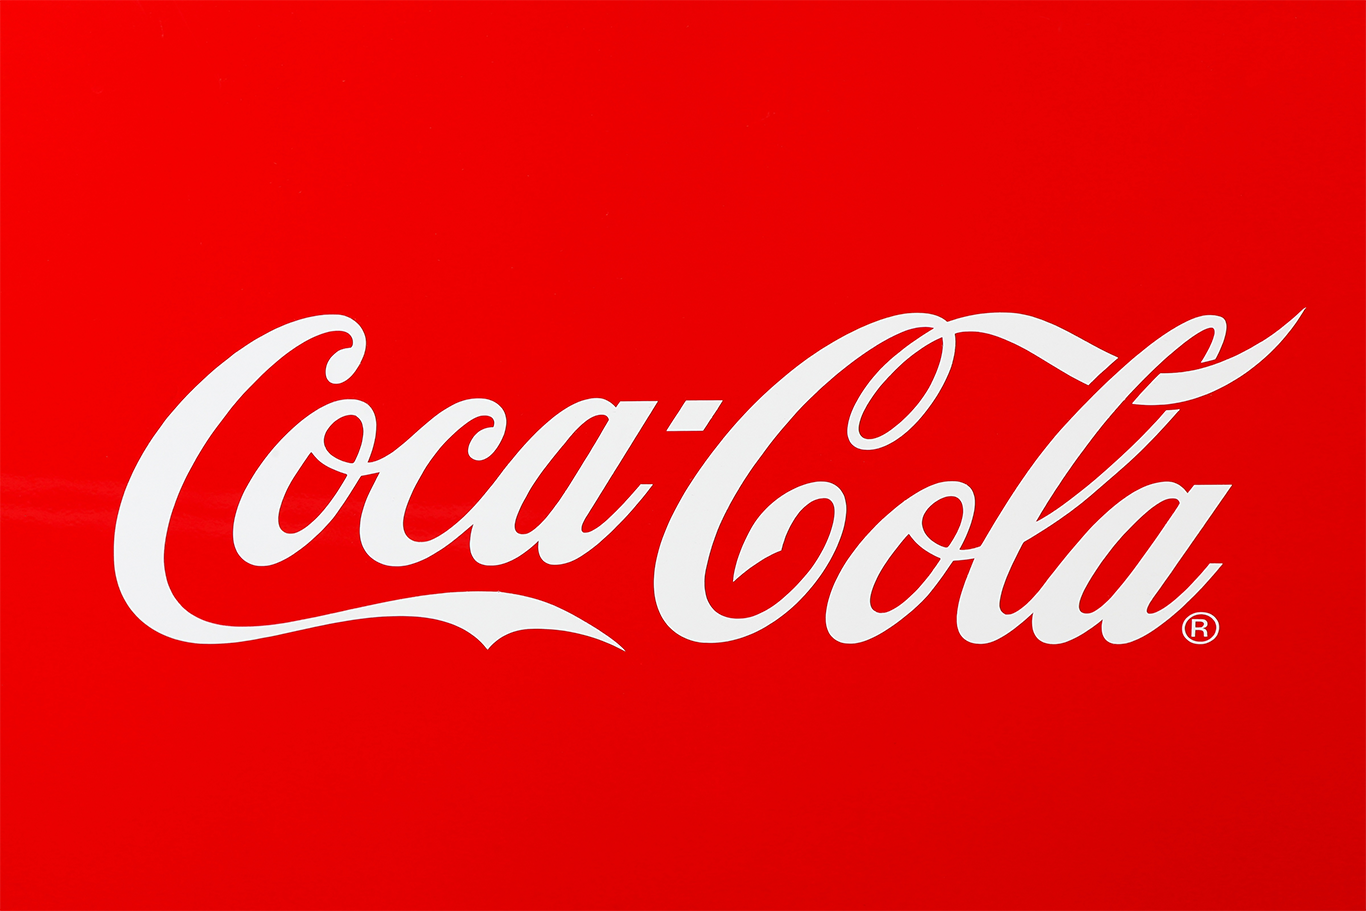 Image of the Coca Cola logo on a red background to support Coca Cola CEO article